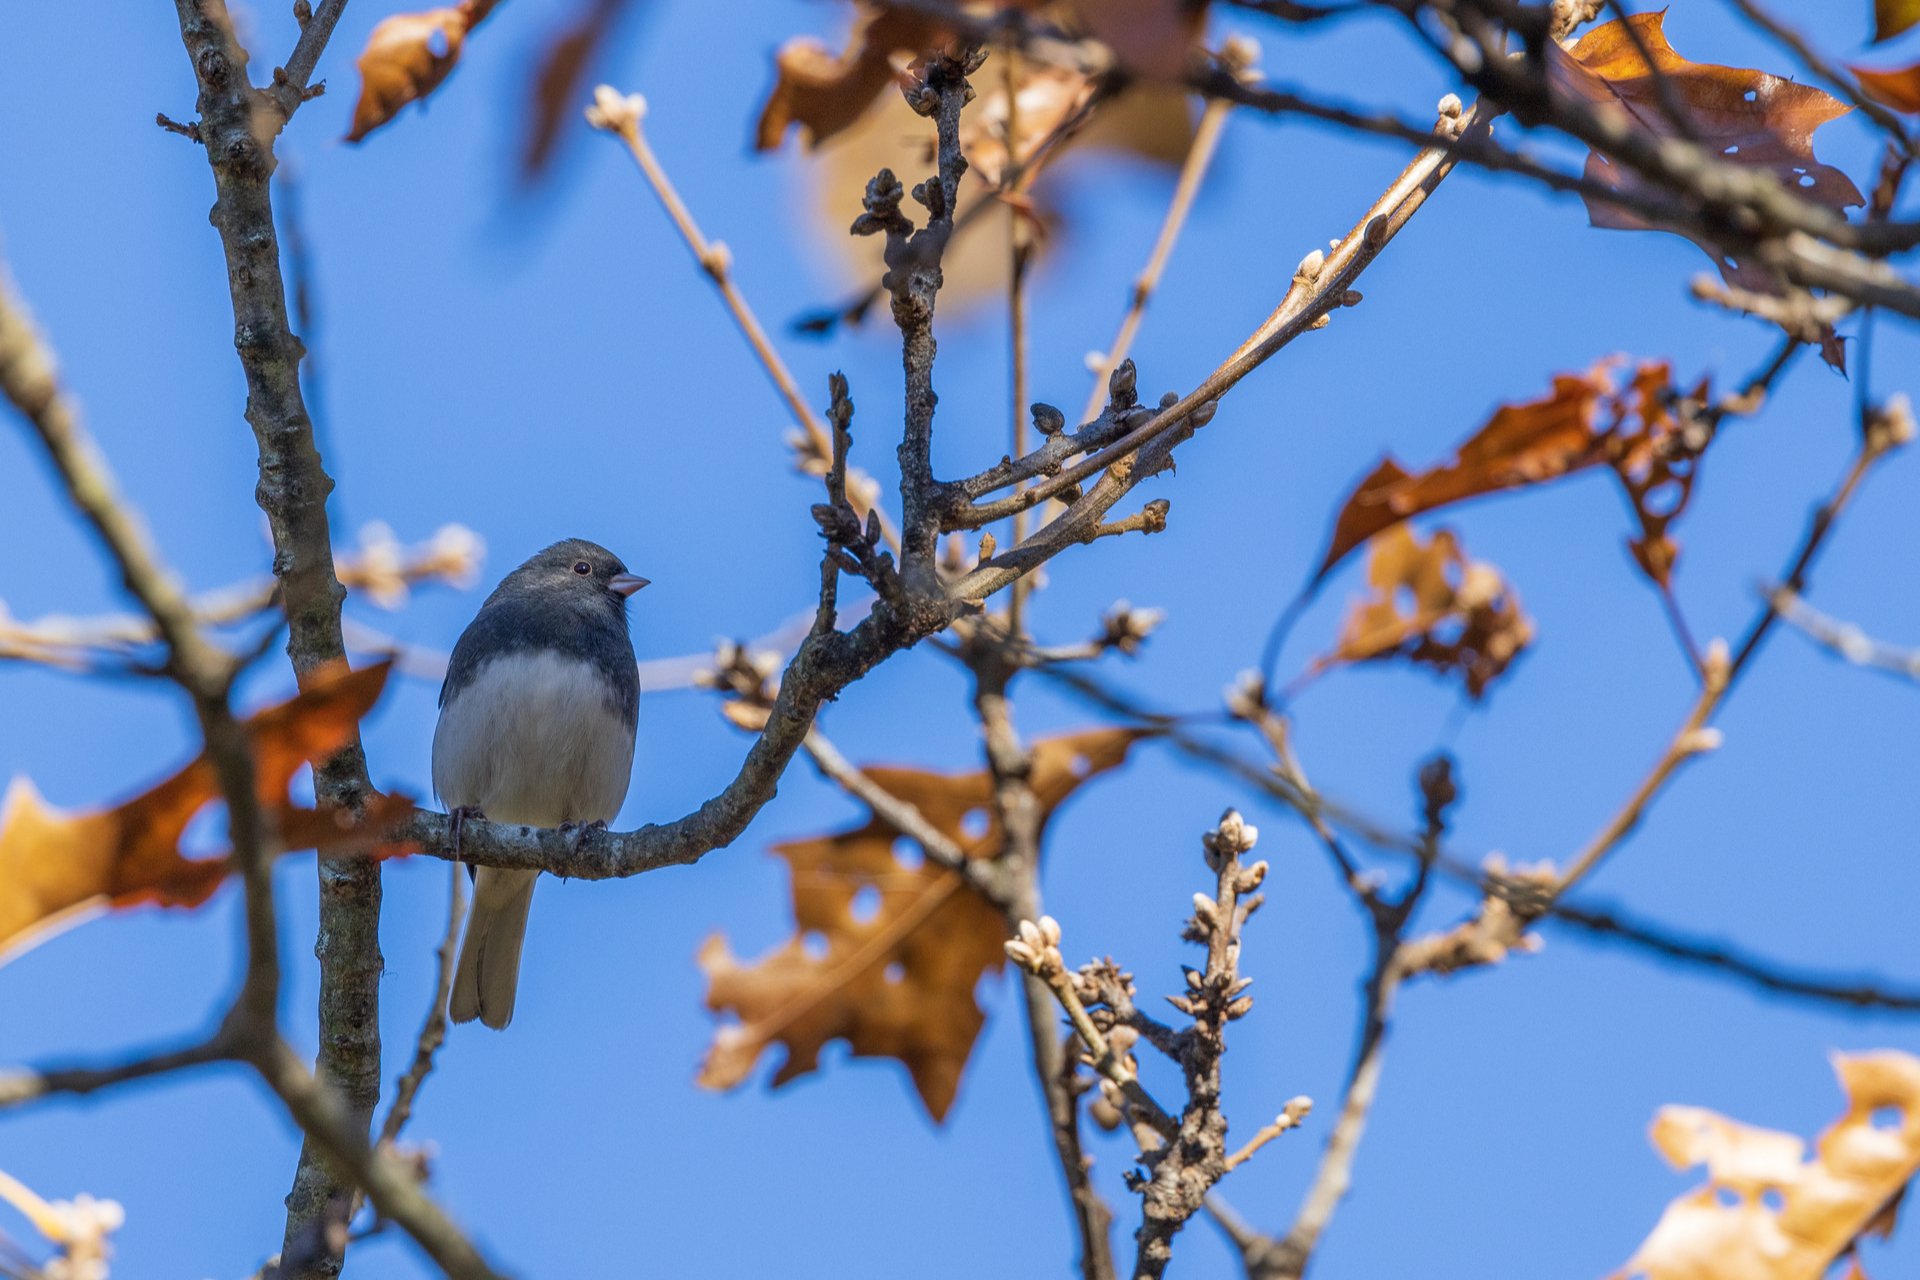 Dark-eyed Junco sitting on branch among fall leaves